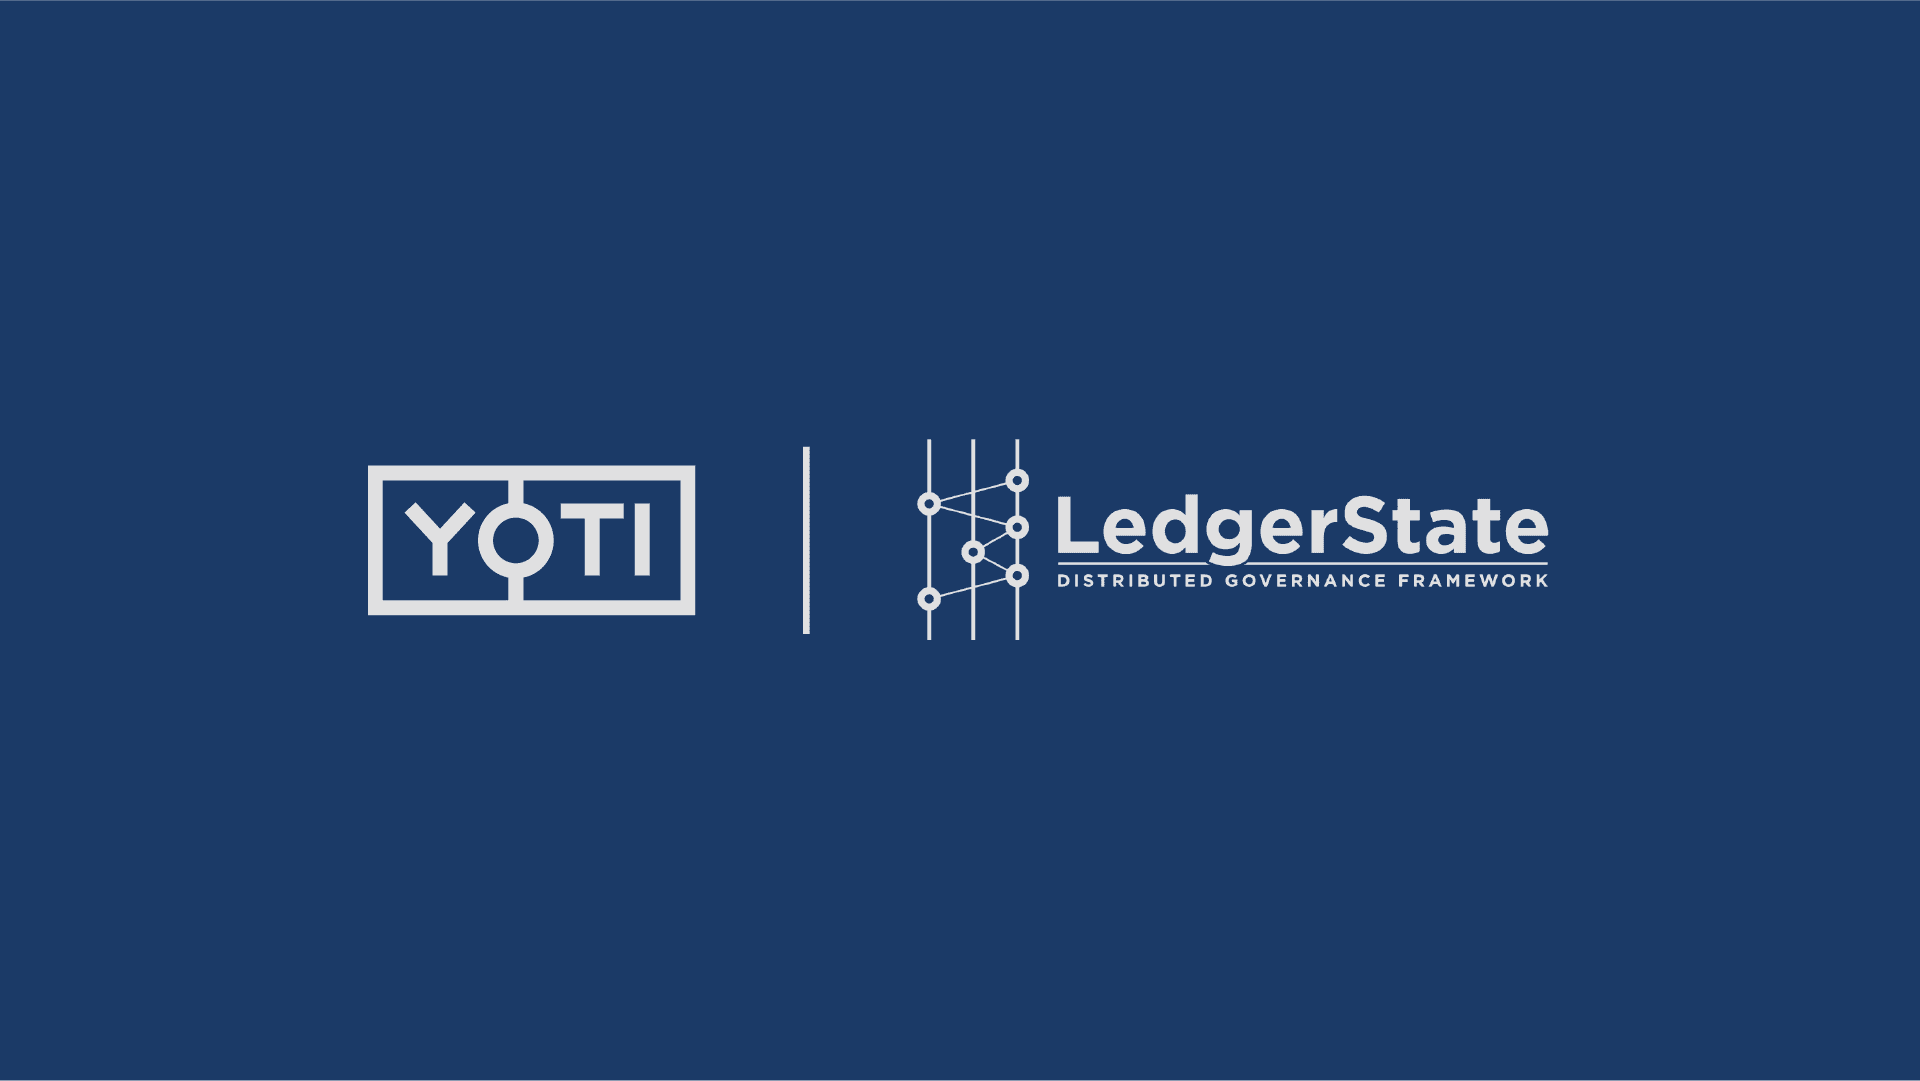 Yoti and LedgerState showcase how next generation blockchain technology can transform the way governments handle personal data